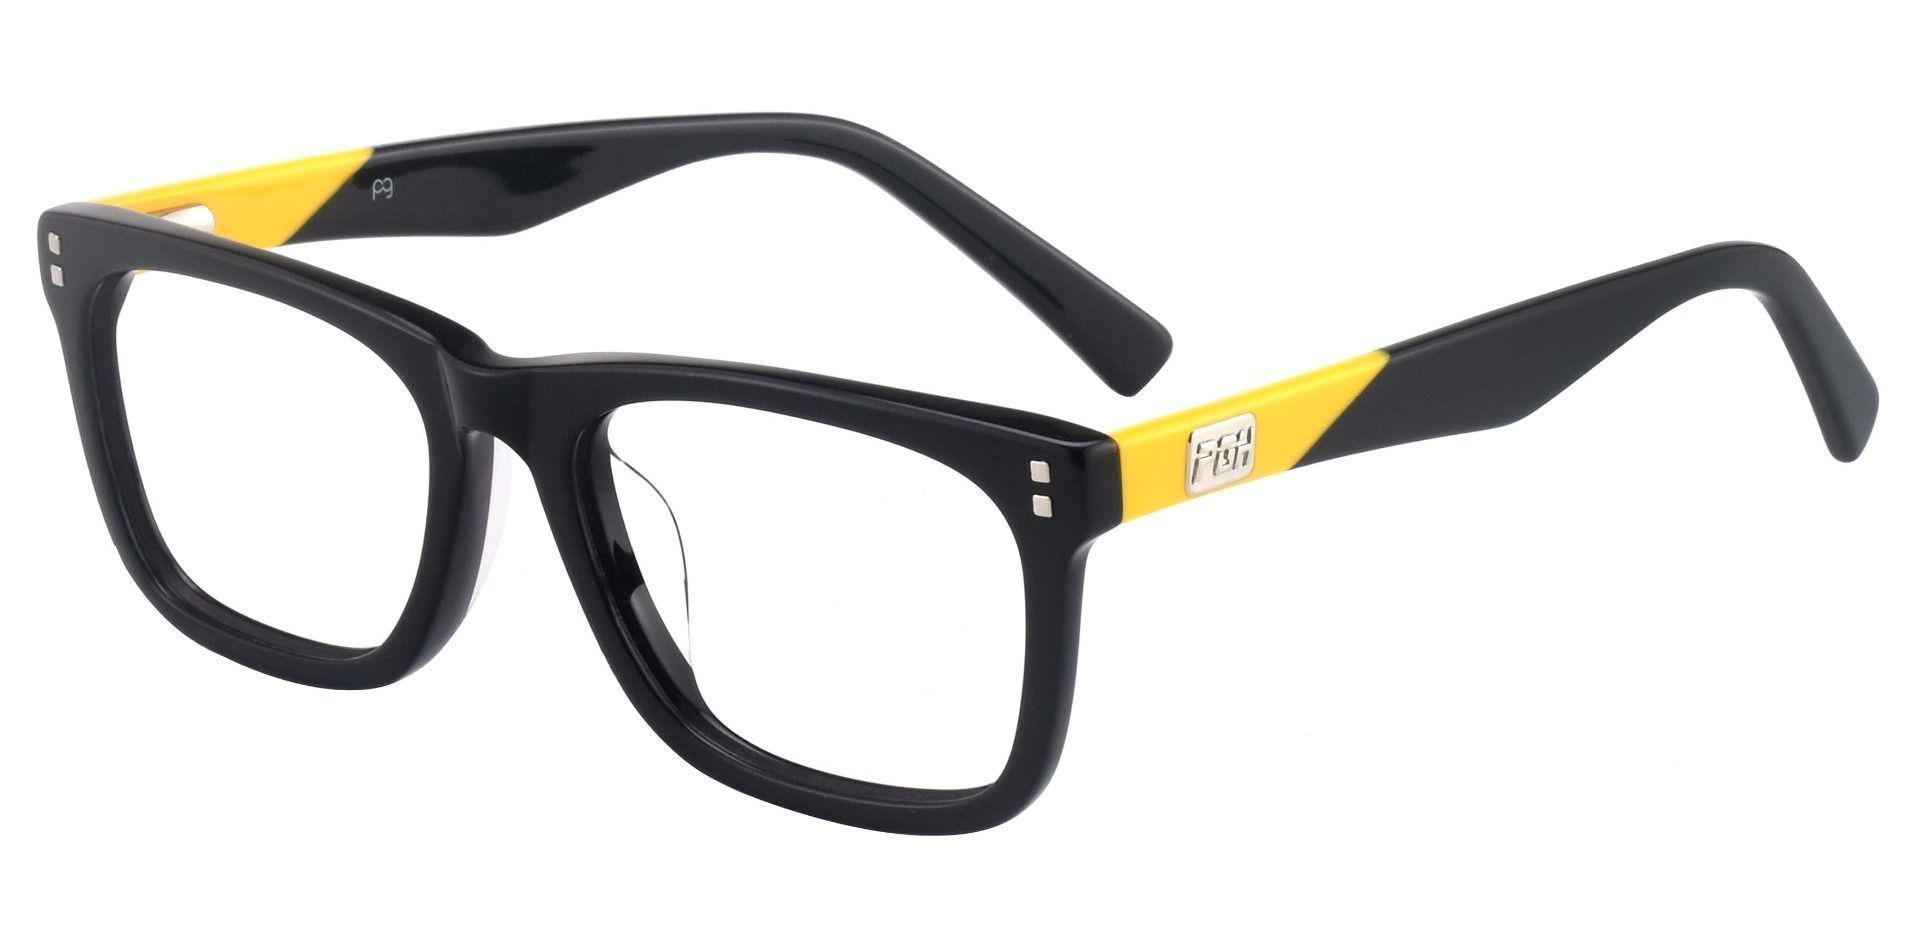 Liberty Rectangle Progressive Glasses - The Frame Is Black And Gold